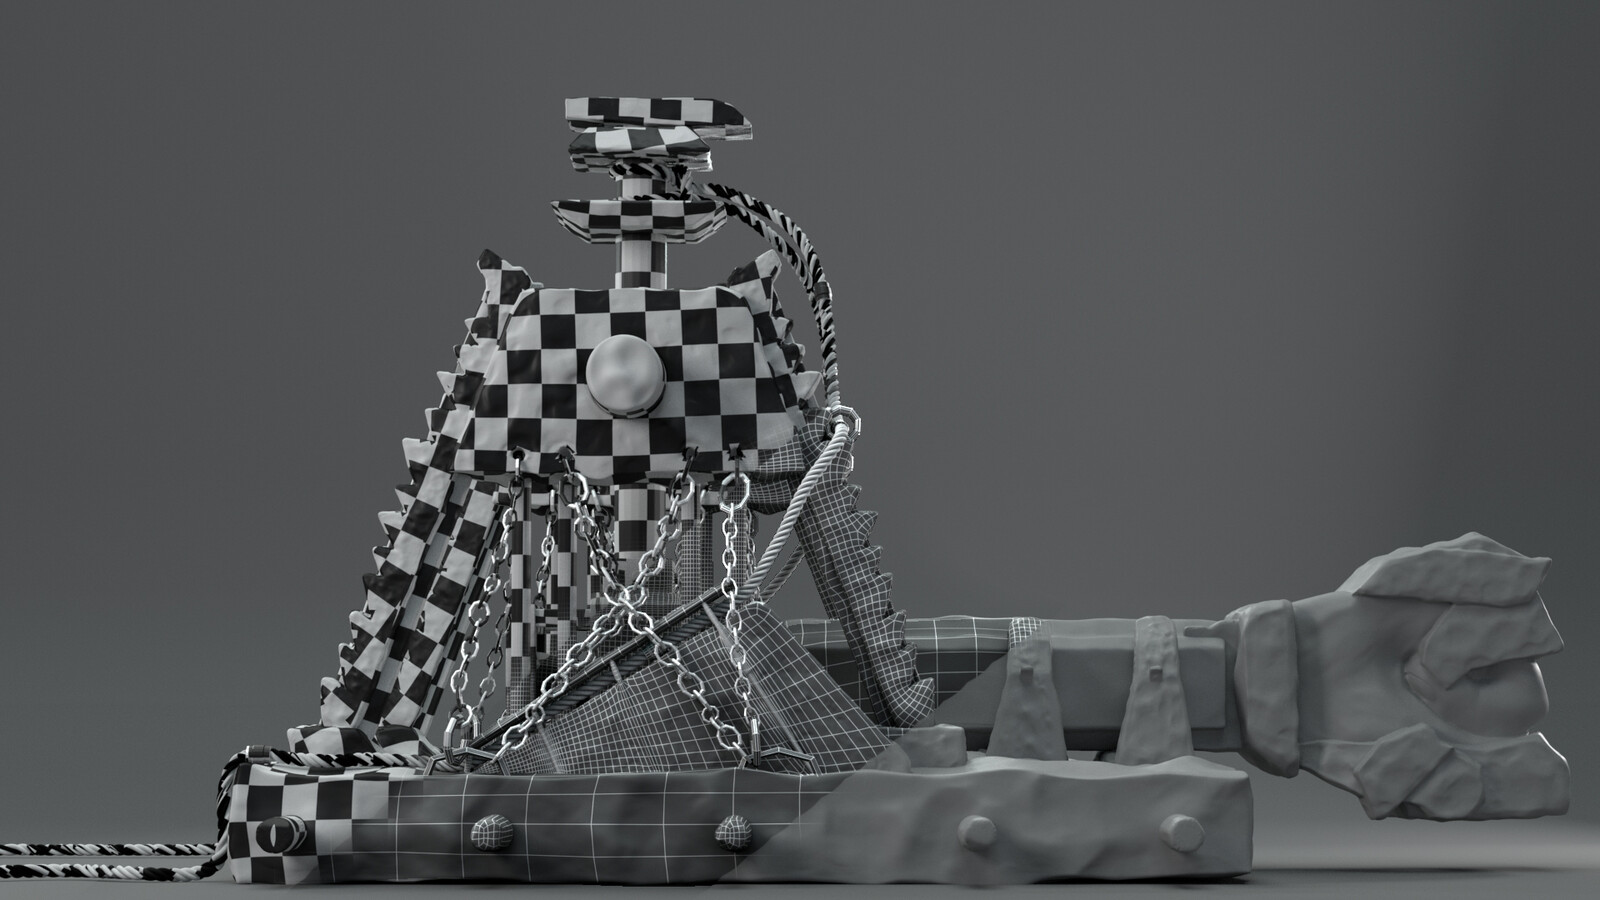 UV, Wireframe, and Grey Shaded render passes